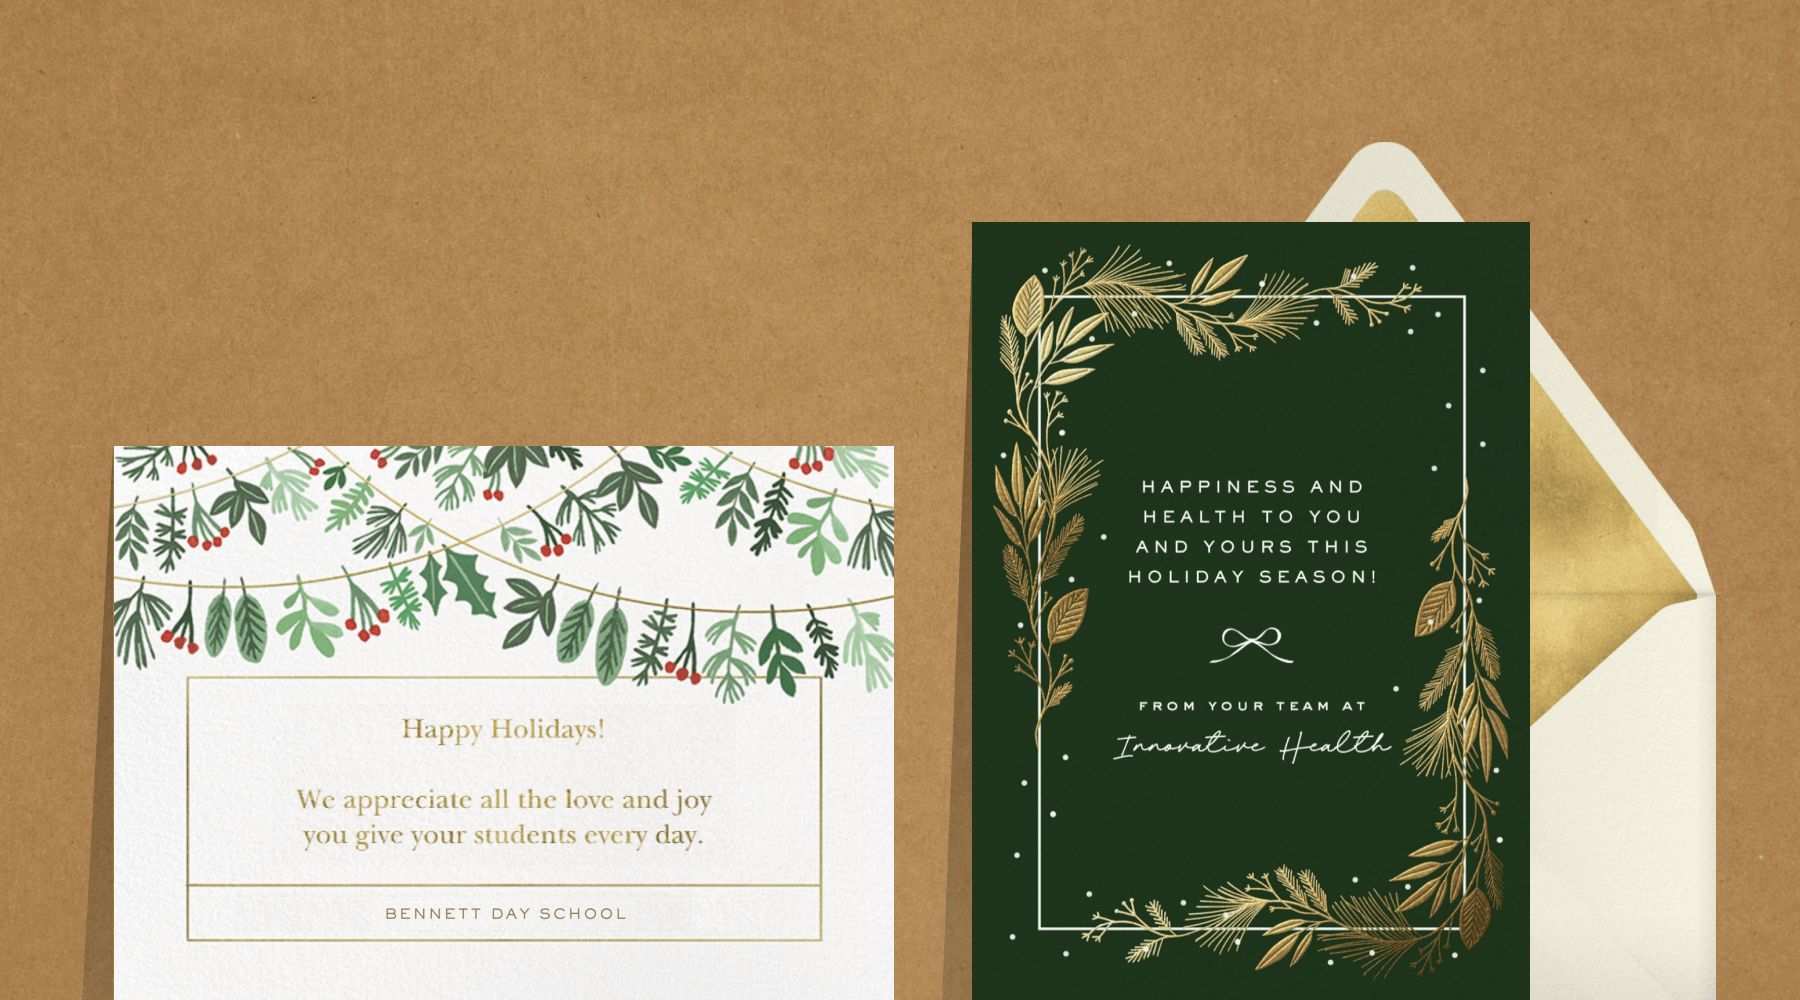 A white holiday card with holly leaves, berries, and sprigs hanging from draped lines; A forest green card with a border of gold winter greenery.